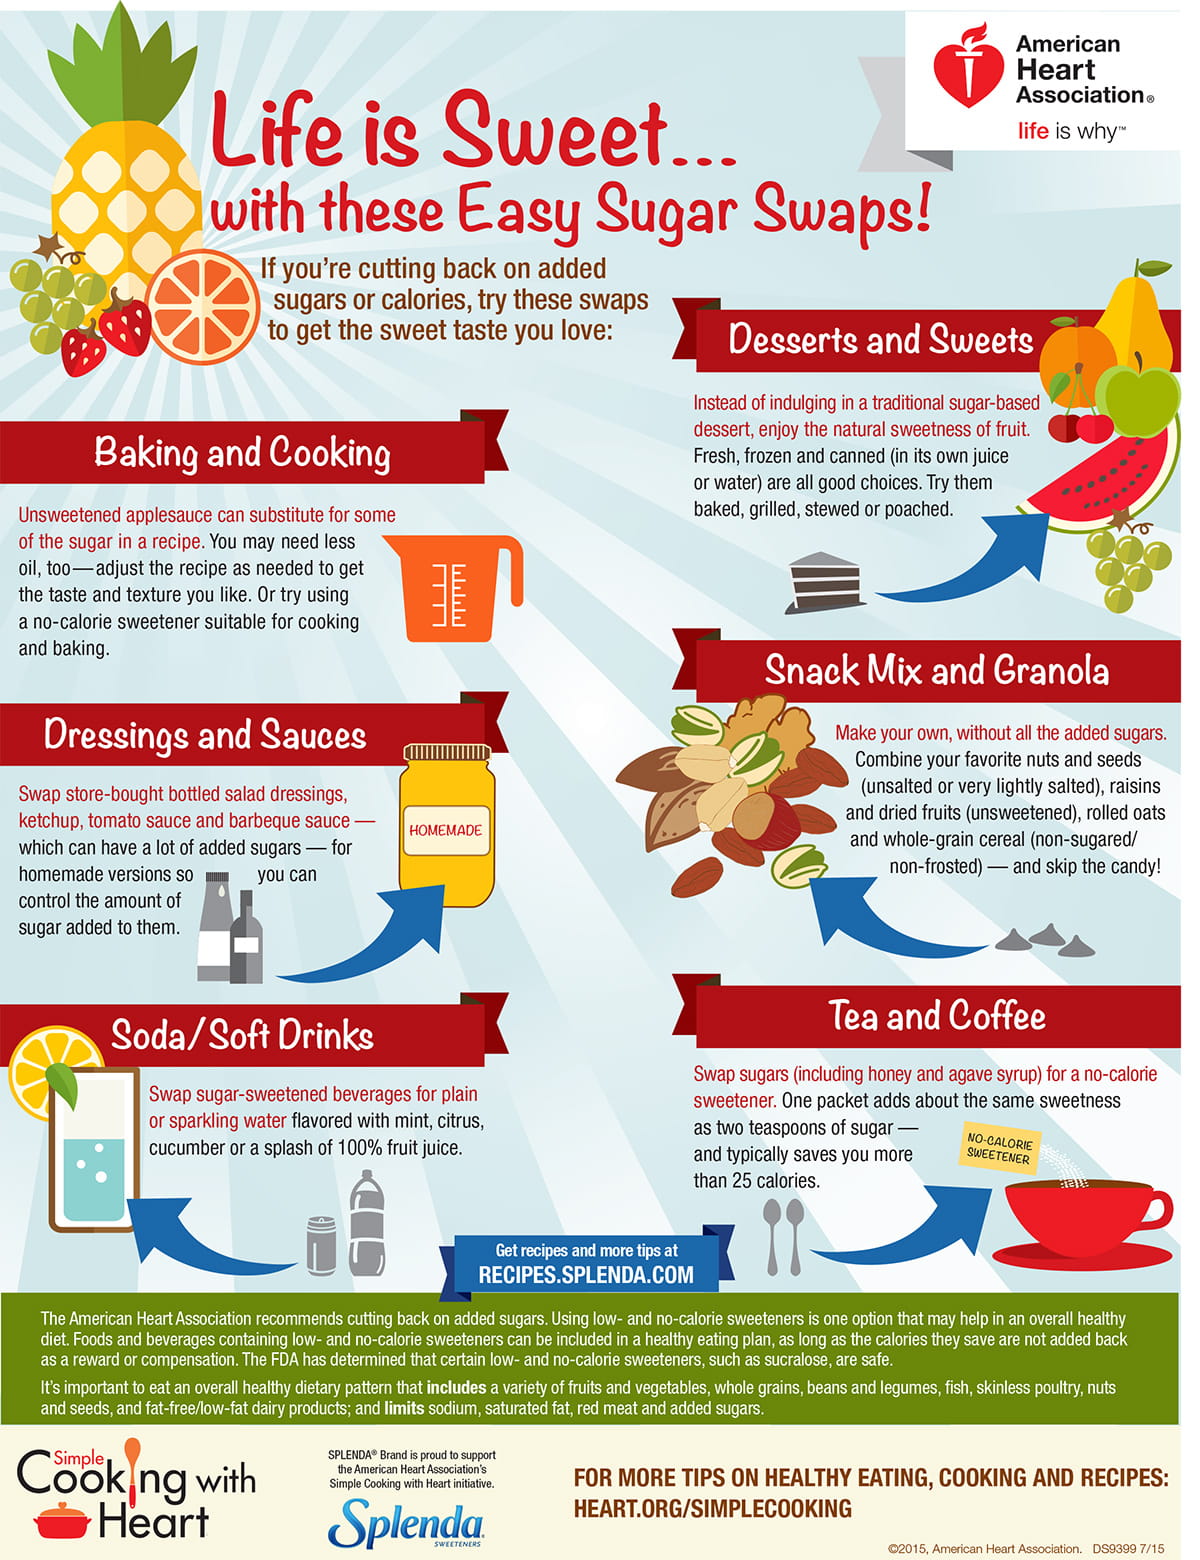 Life is Sweet with these easy sugar swaps